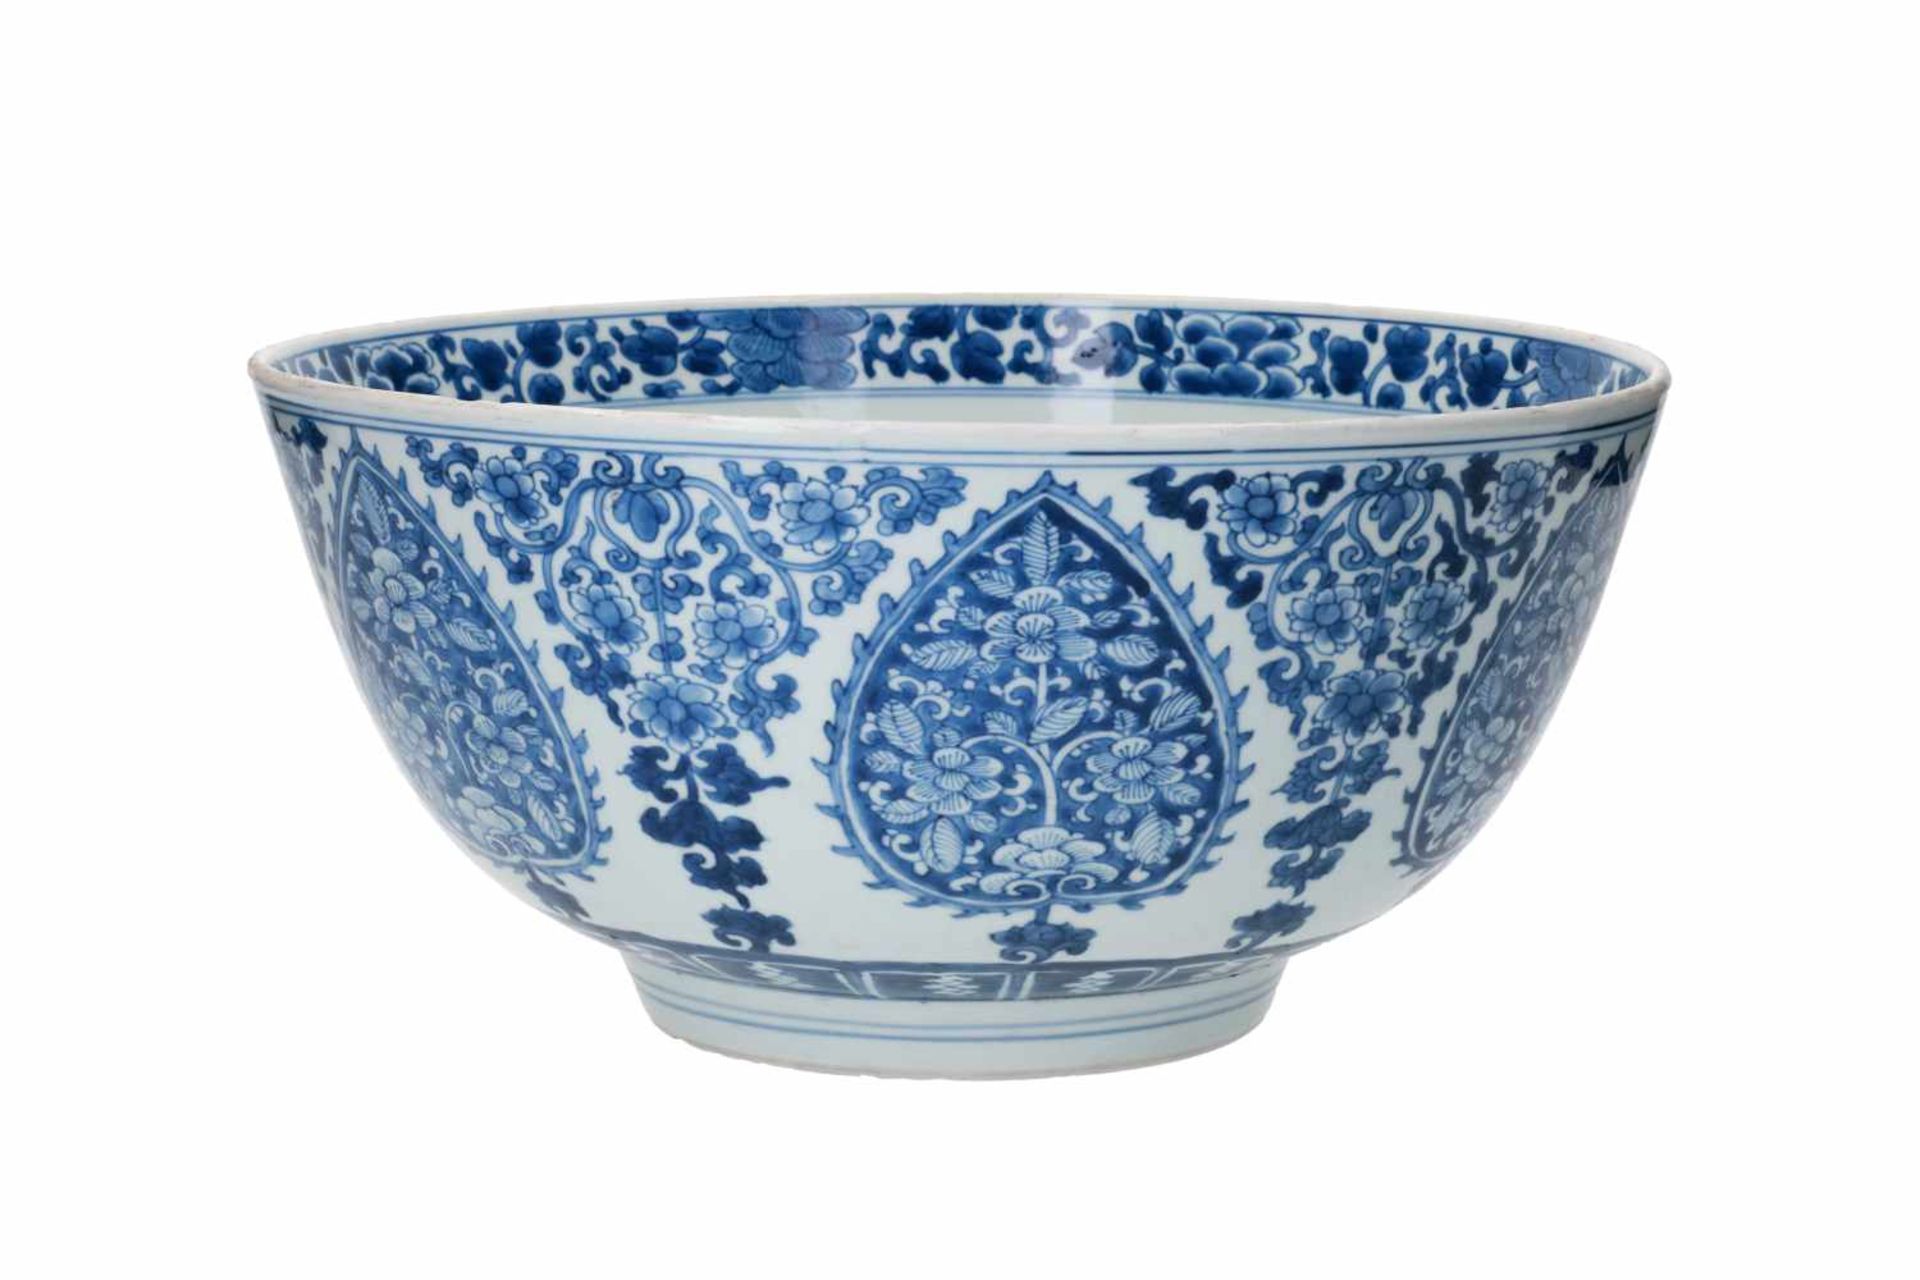 A blue and white porcelain bowl, decorated with flowers. Marked with symbol. China, Kangxi.